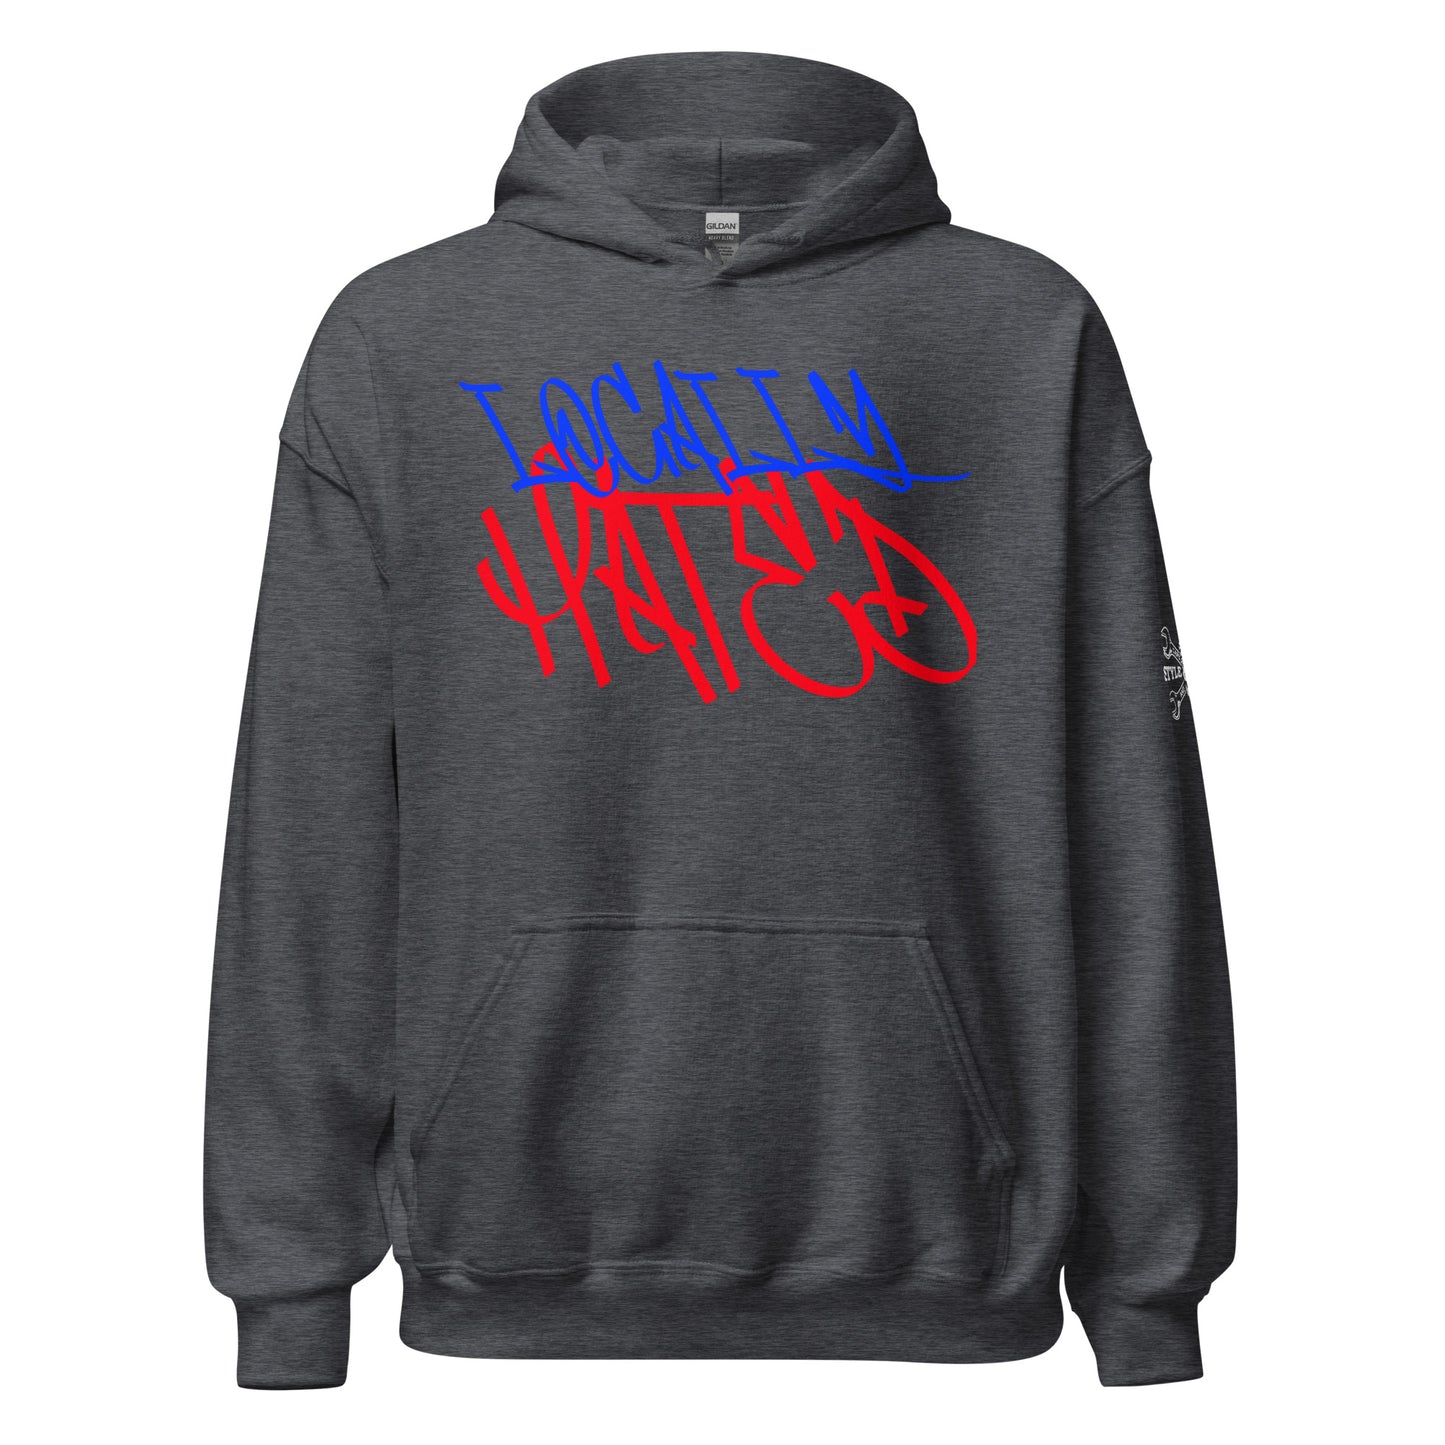 Stylepoint Locally Hated Hoodie